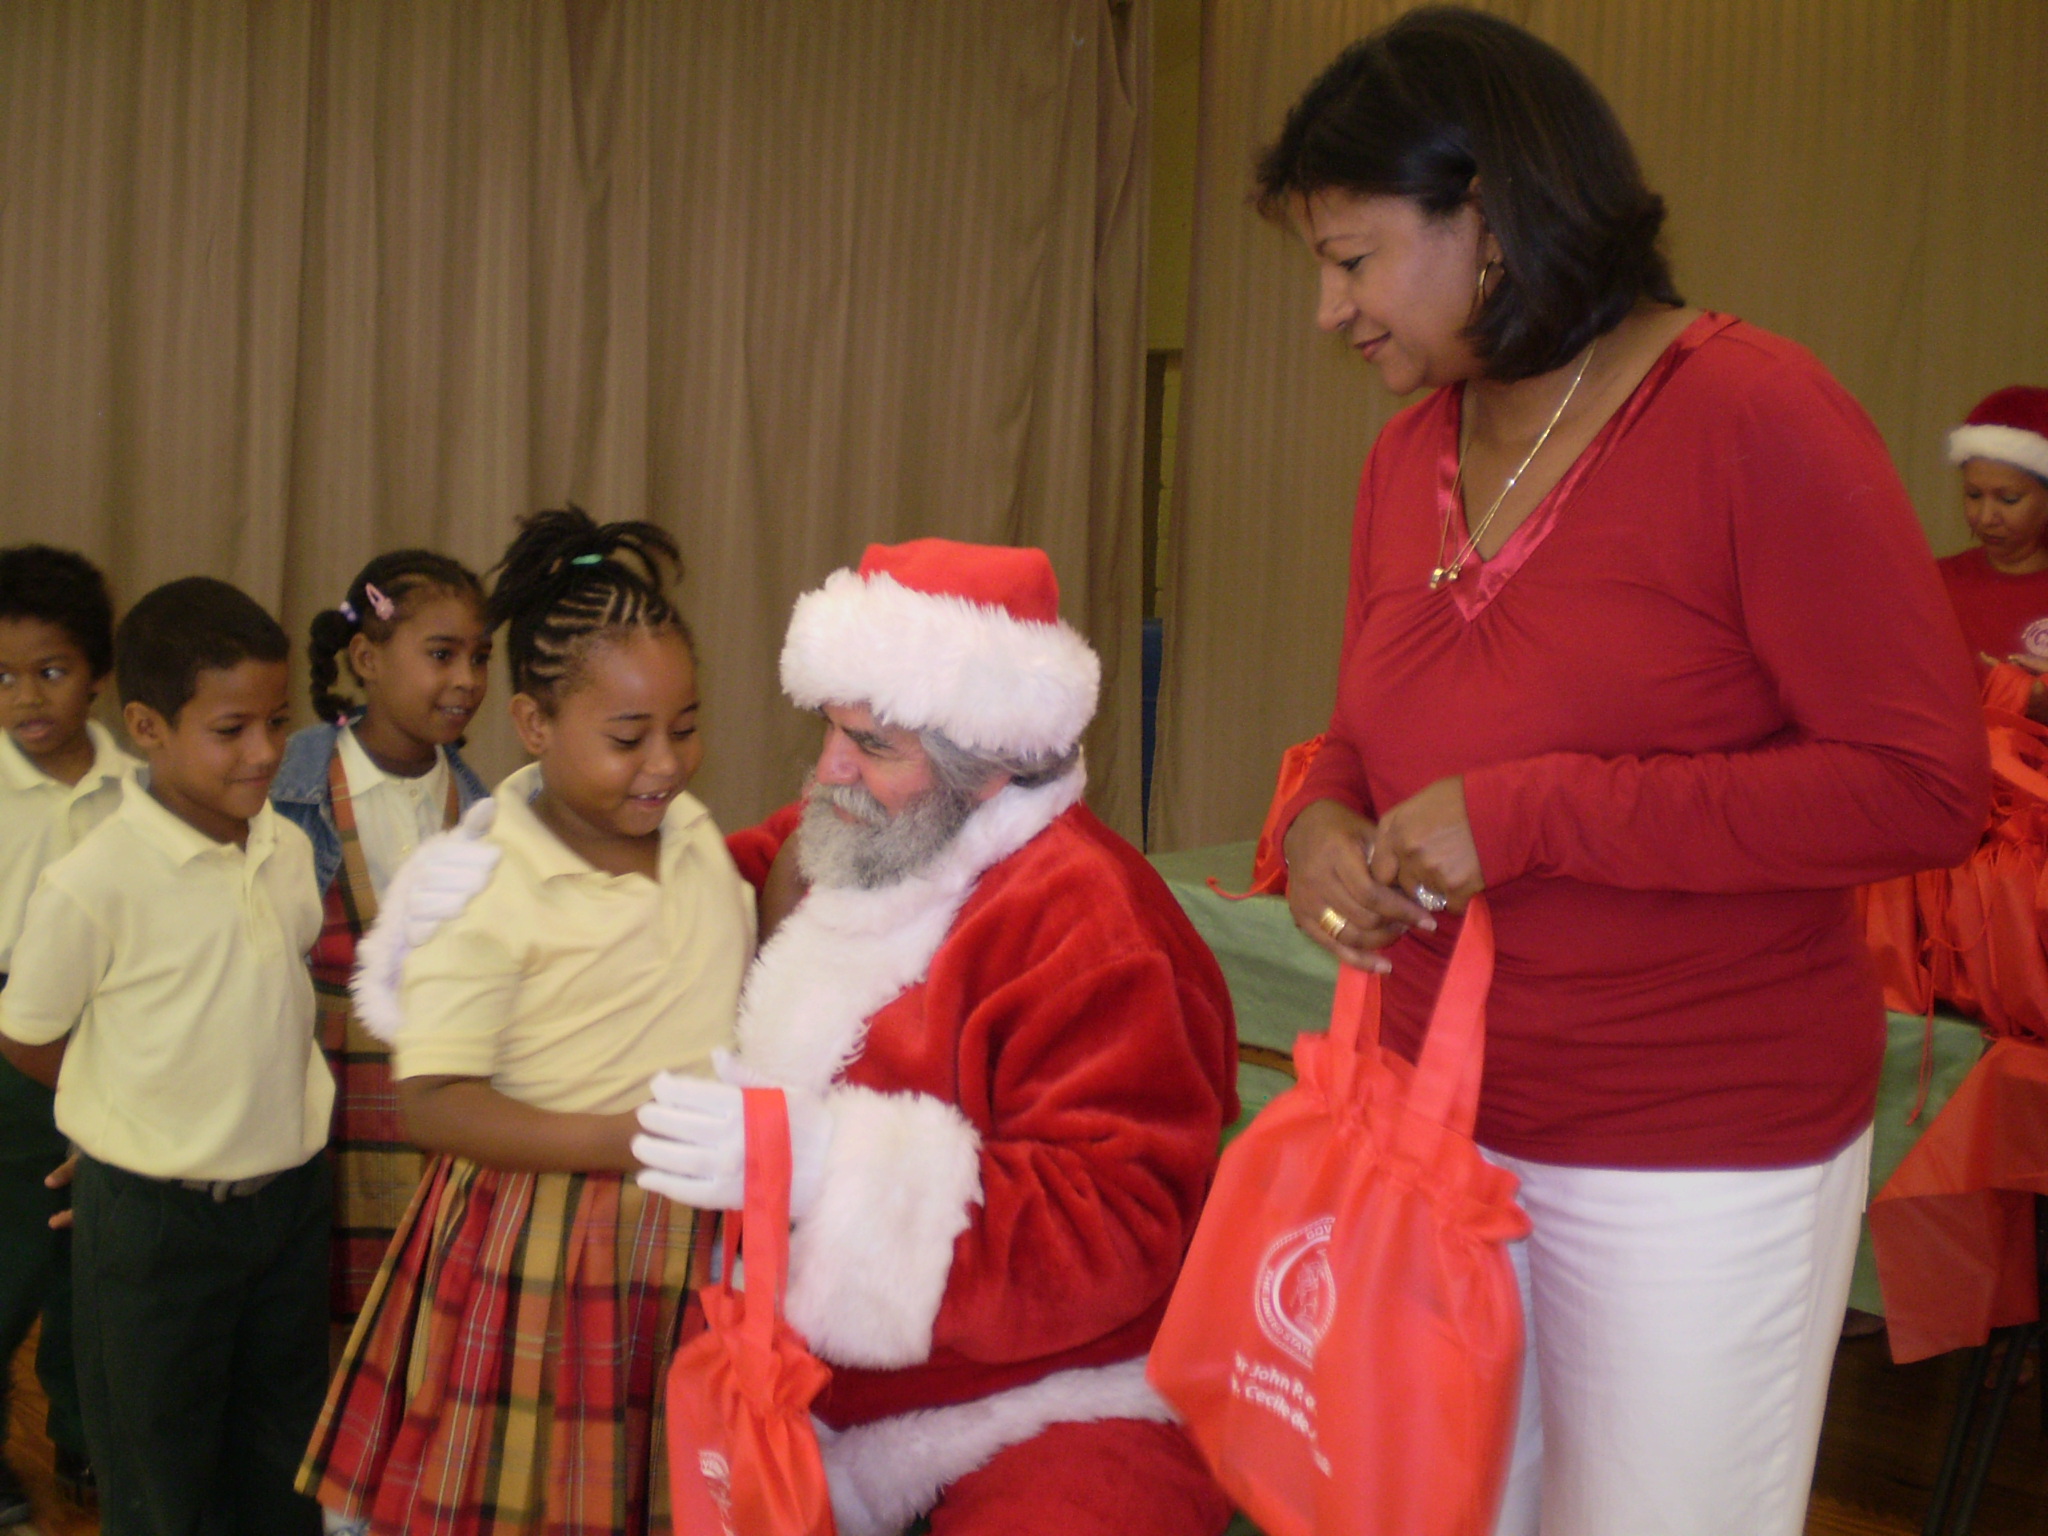 Melissa Ferreras, Santa (aka Chris Finch, Department of Human Services commissioner), and first lady Cecile deJongh.